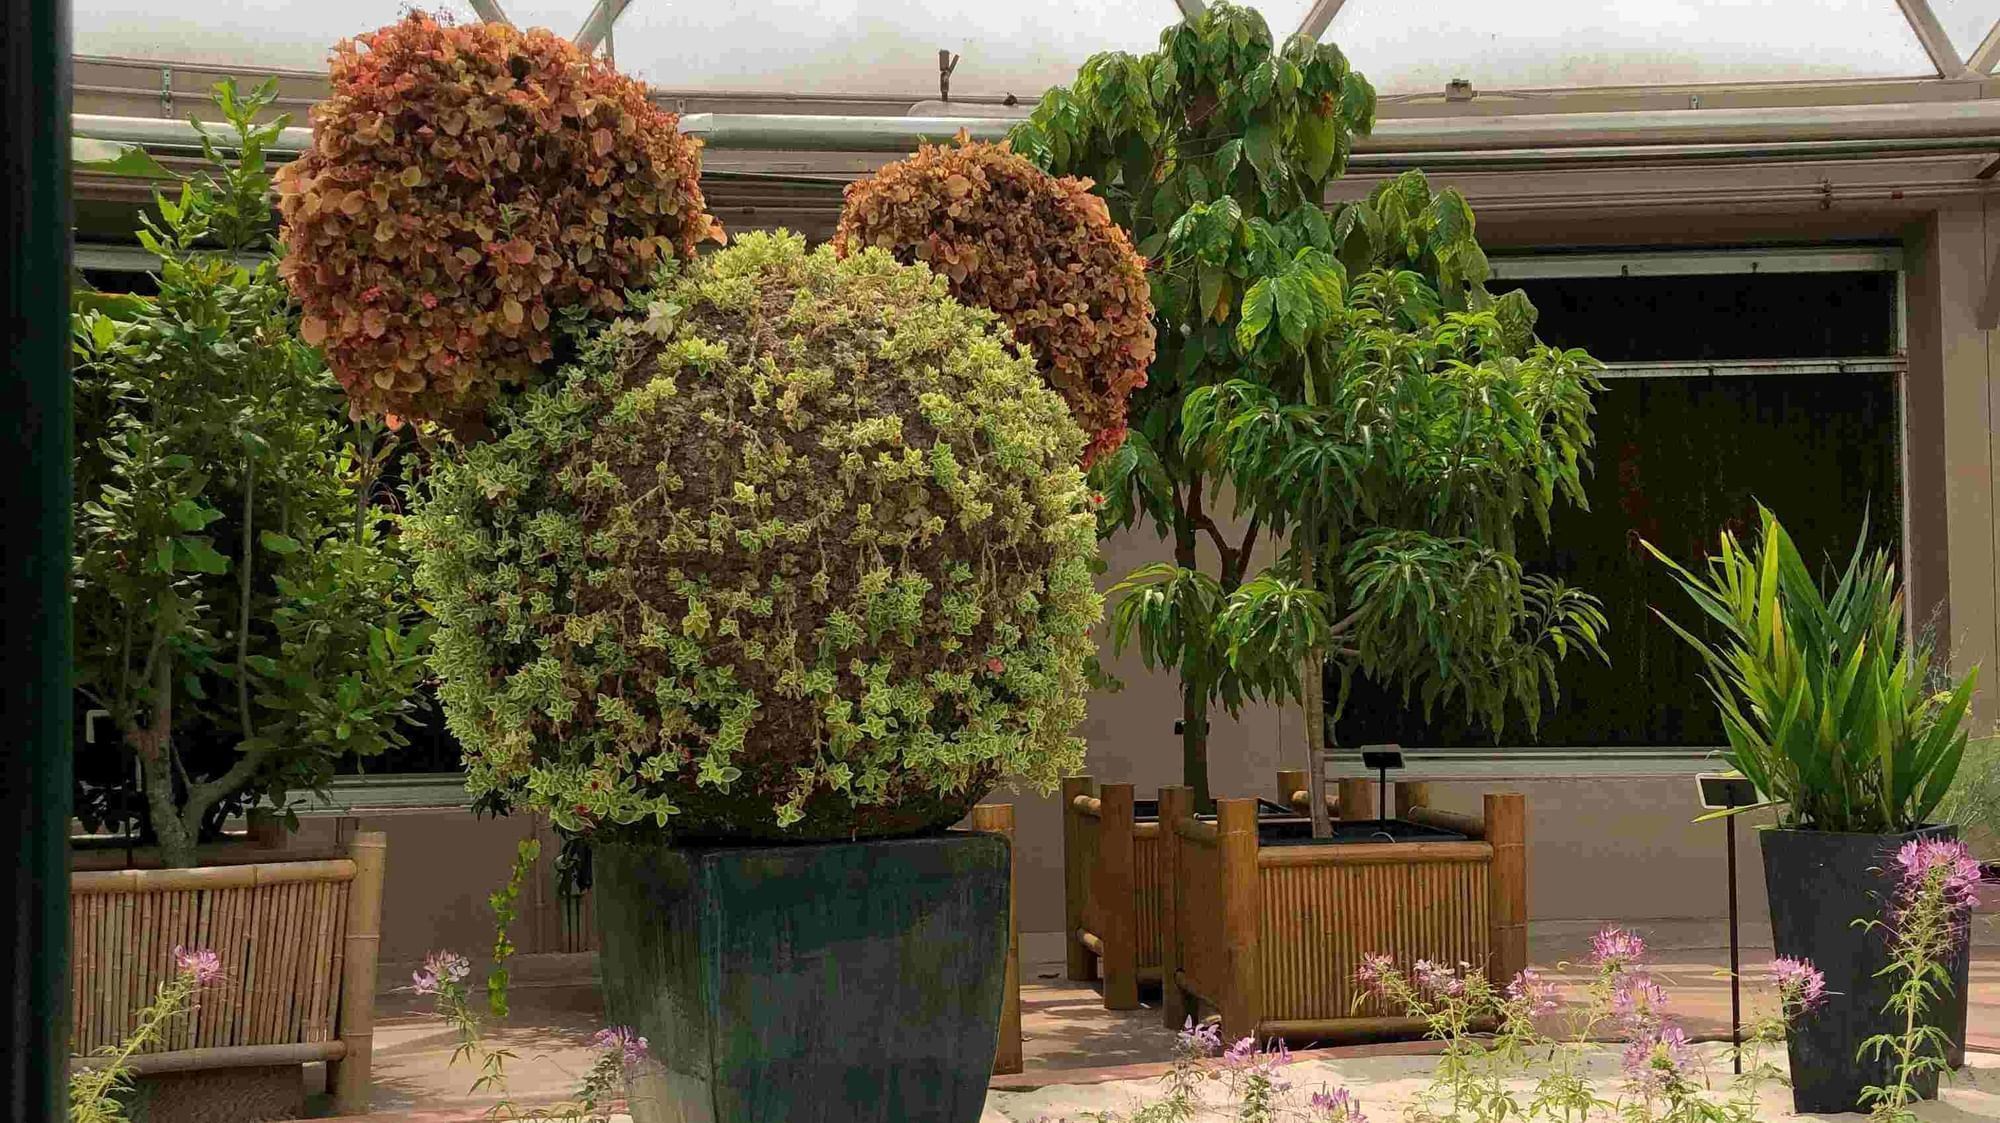 Mickey Mouse shaped shrub at Living with The Land at Disney's EPCOT to signify Earth Day